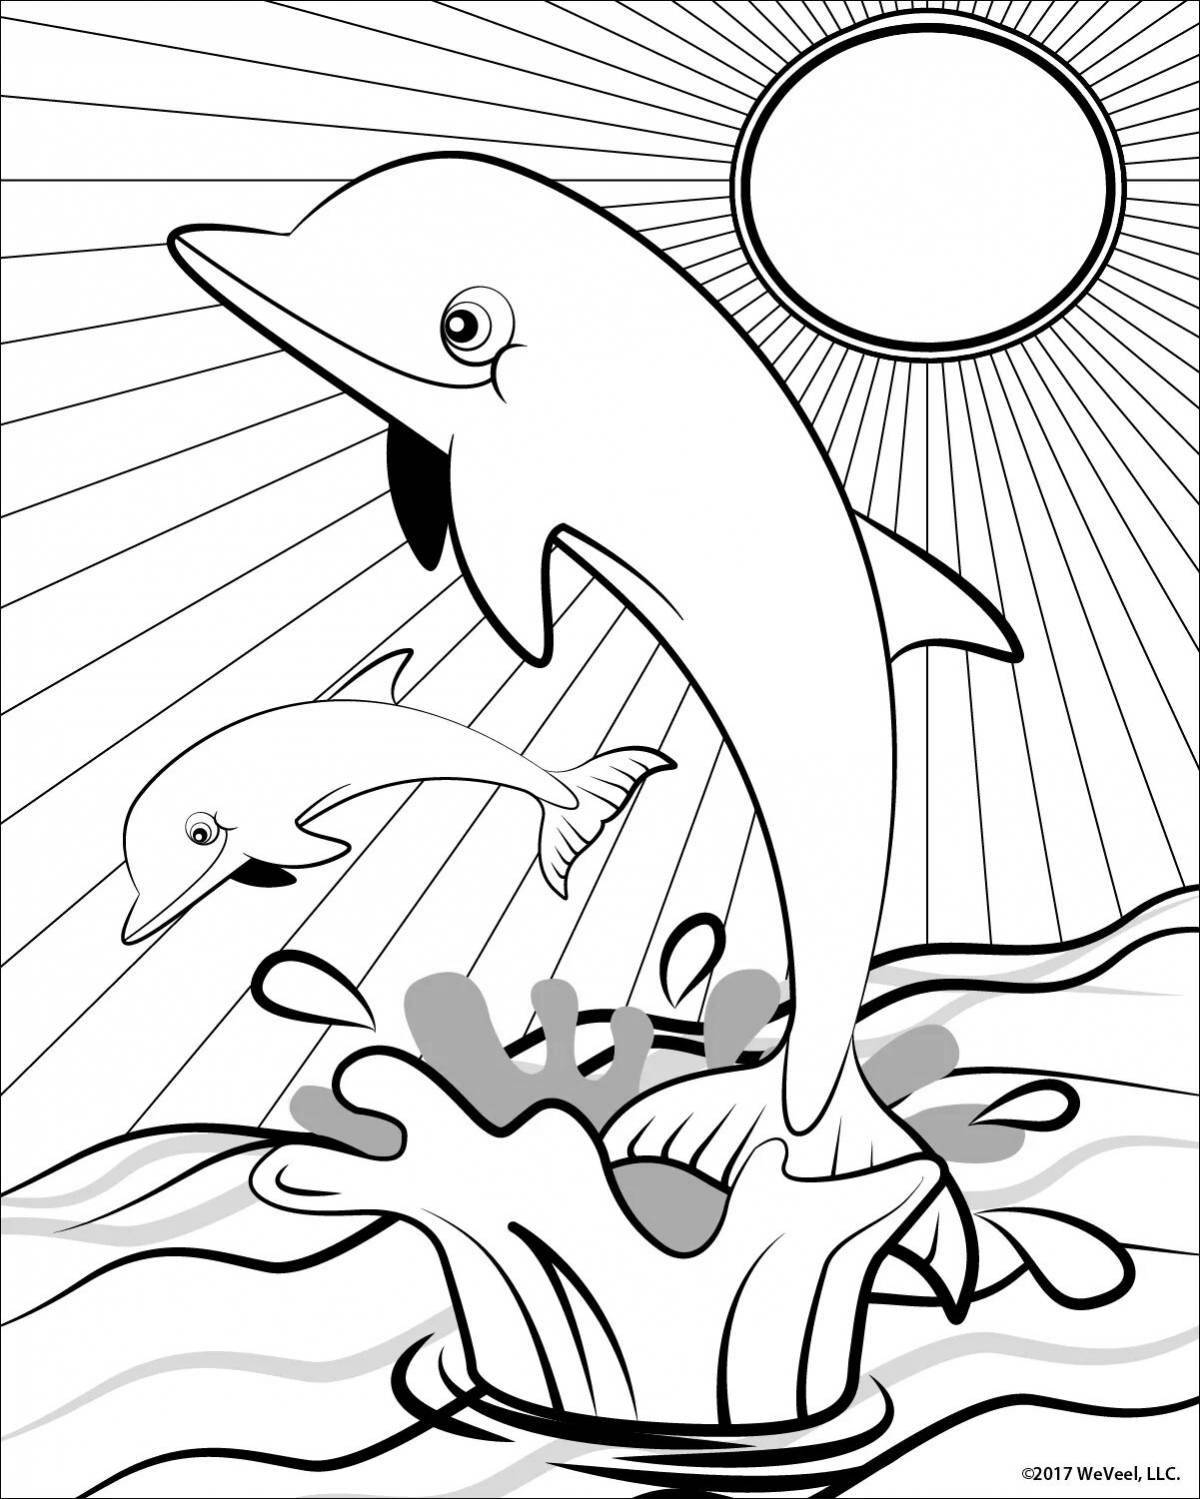 Awesome dolphin coloring page